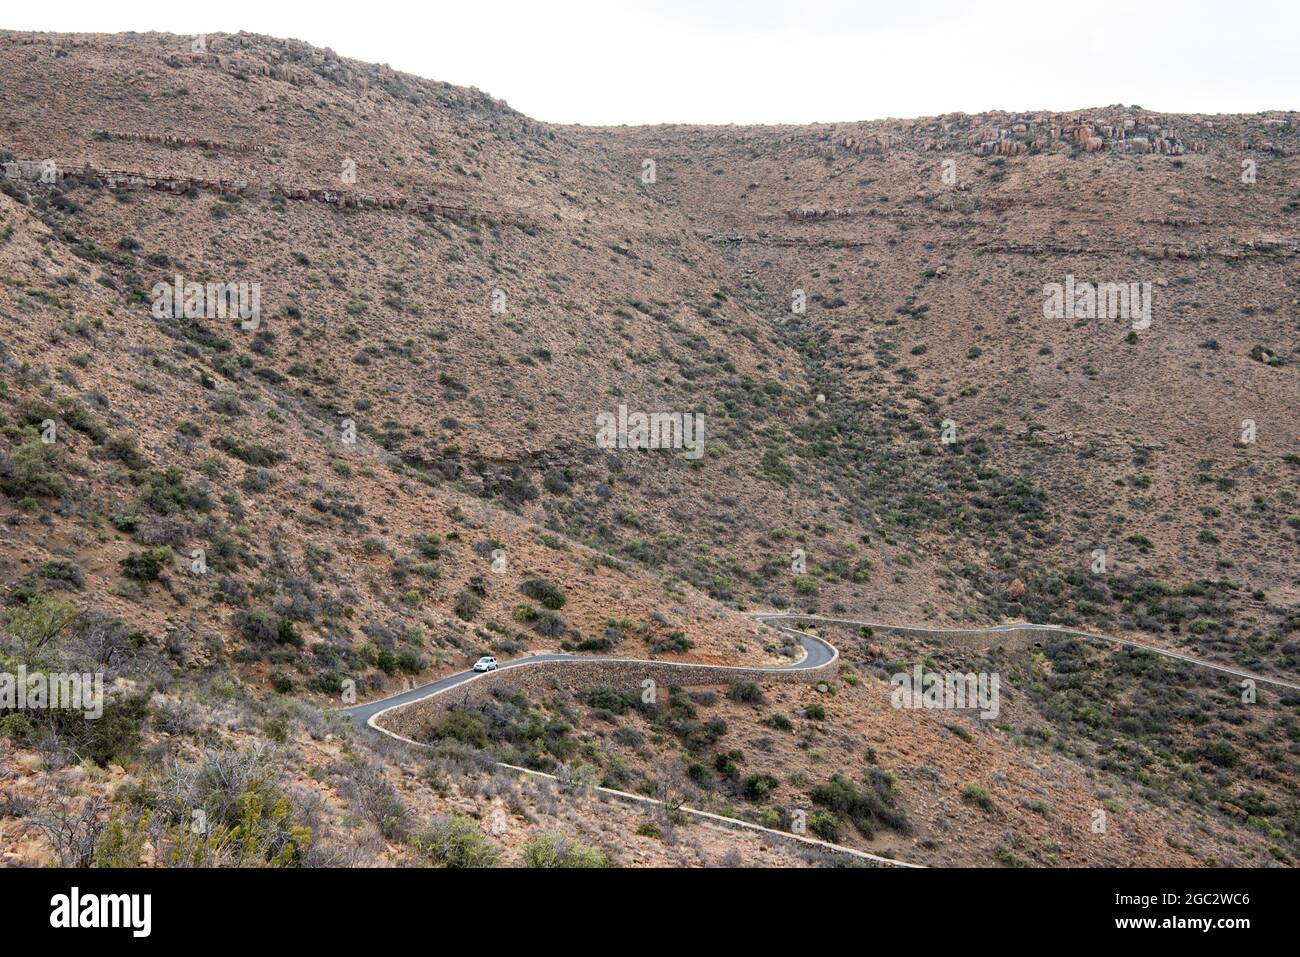 Karoo National Park, Beaufort West, South Africa Stock Photo